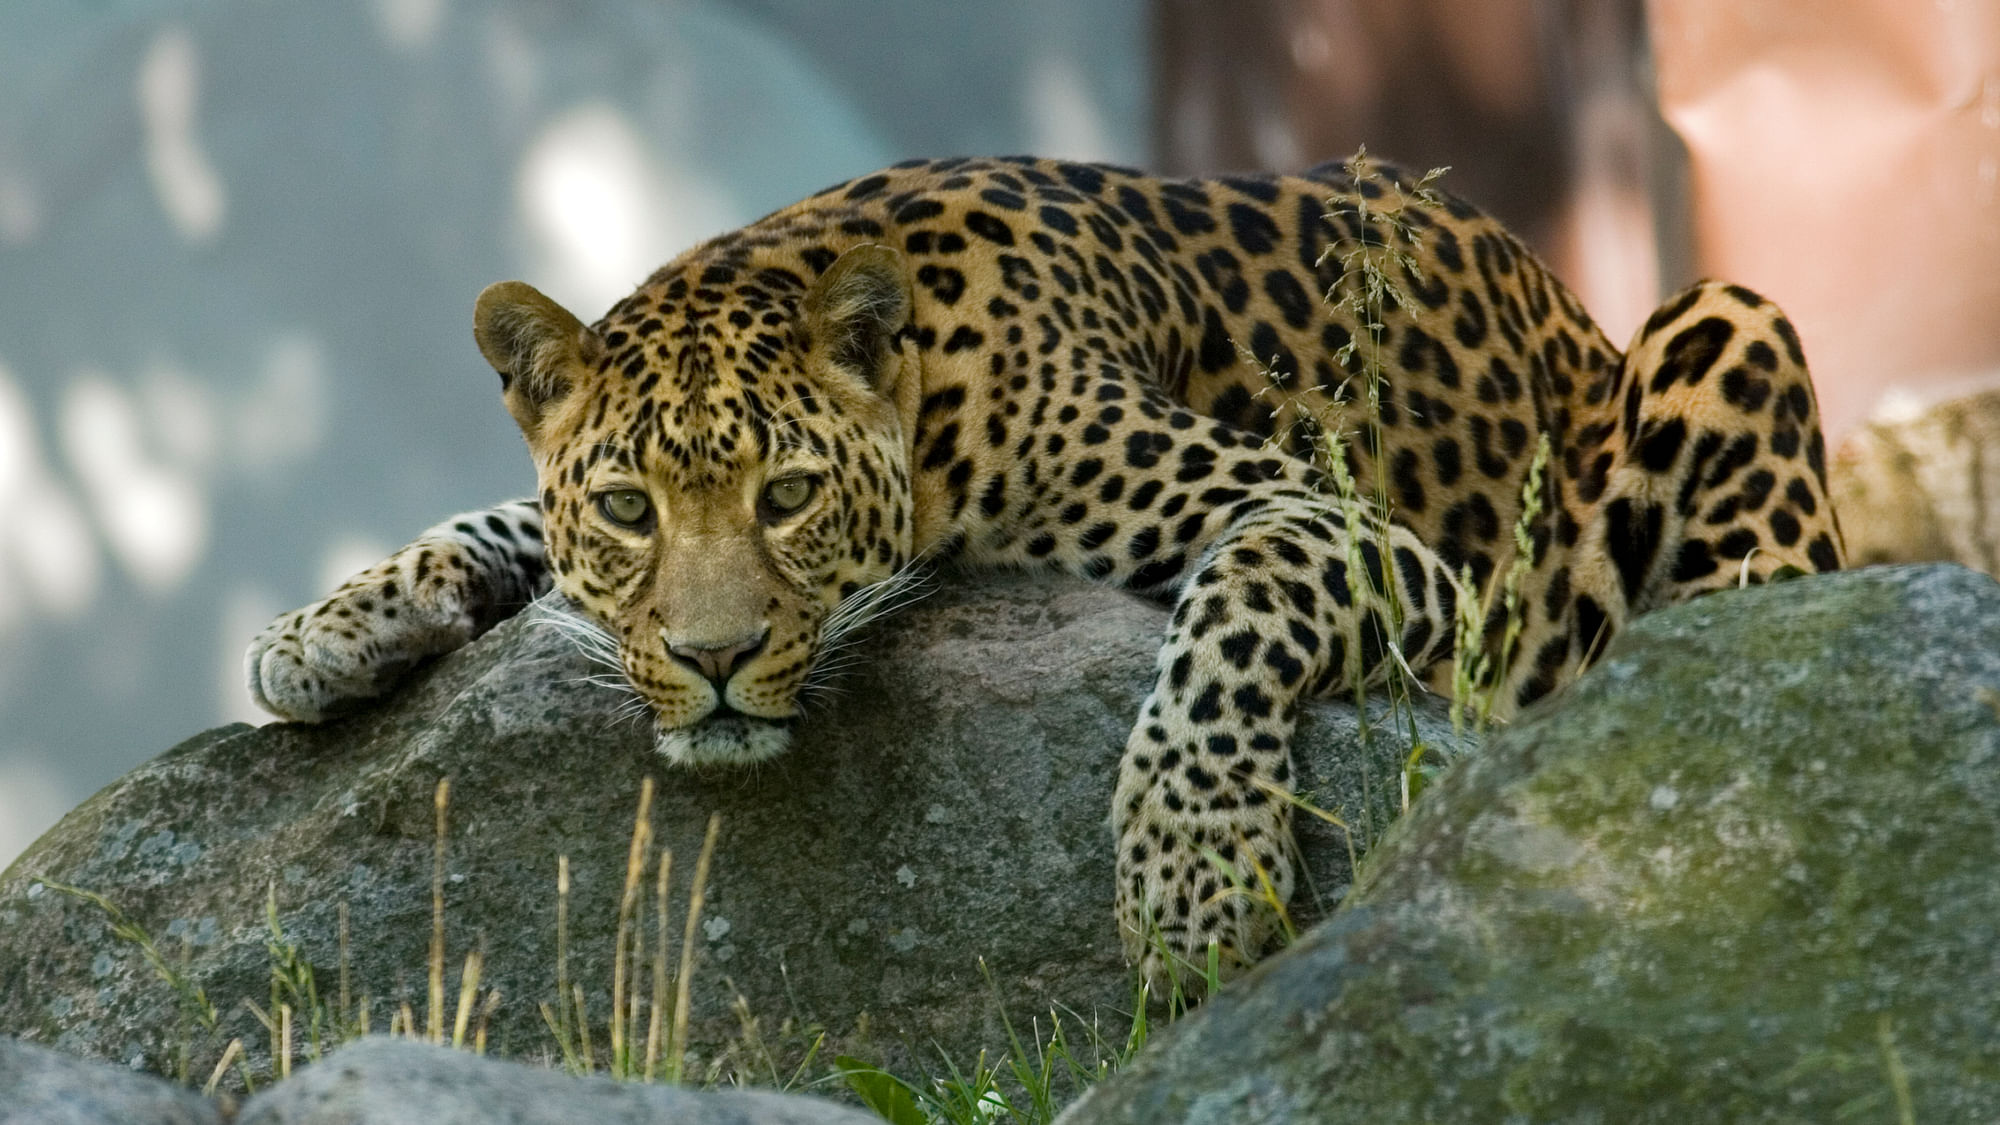 After his rescue, the leopard attacked a 65-year-old villager, Govind Jadav, and left him injured